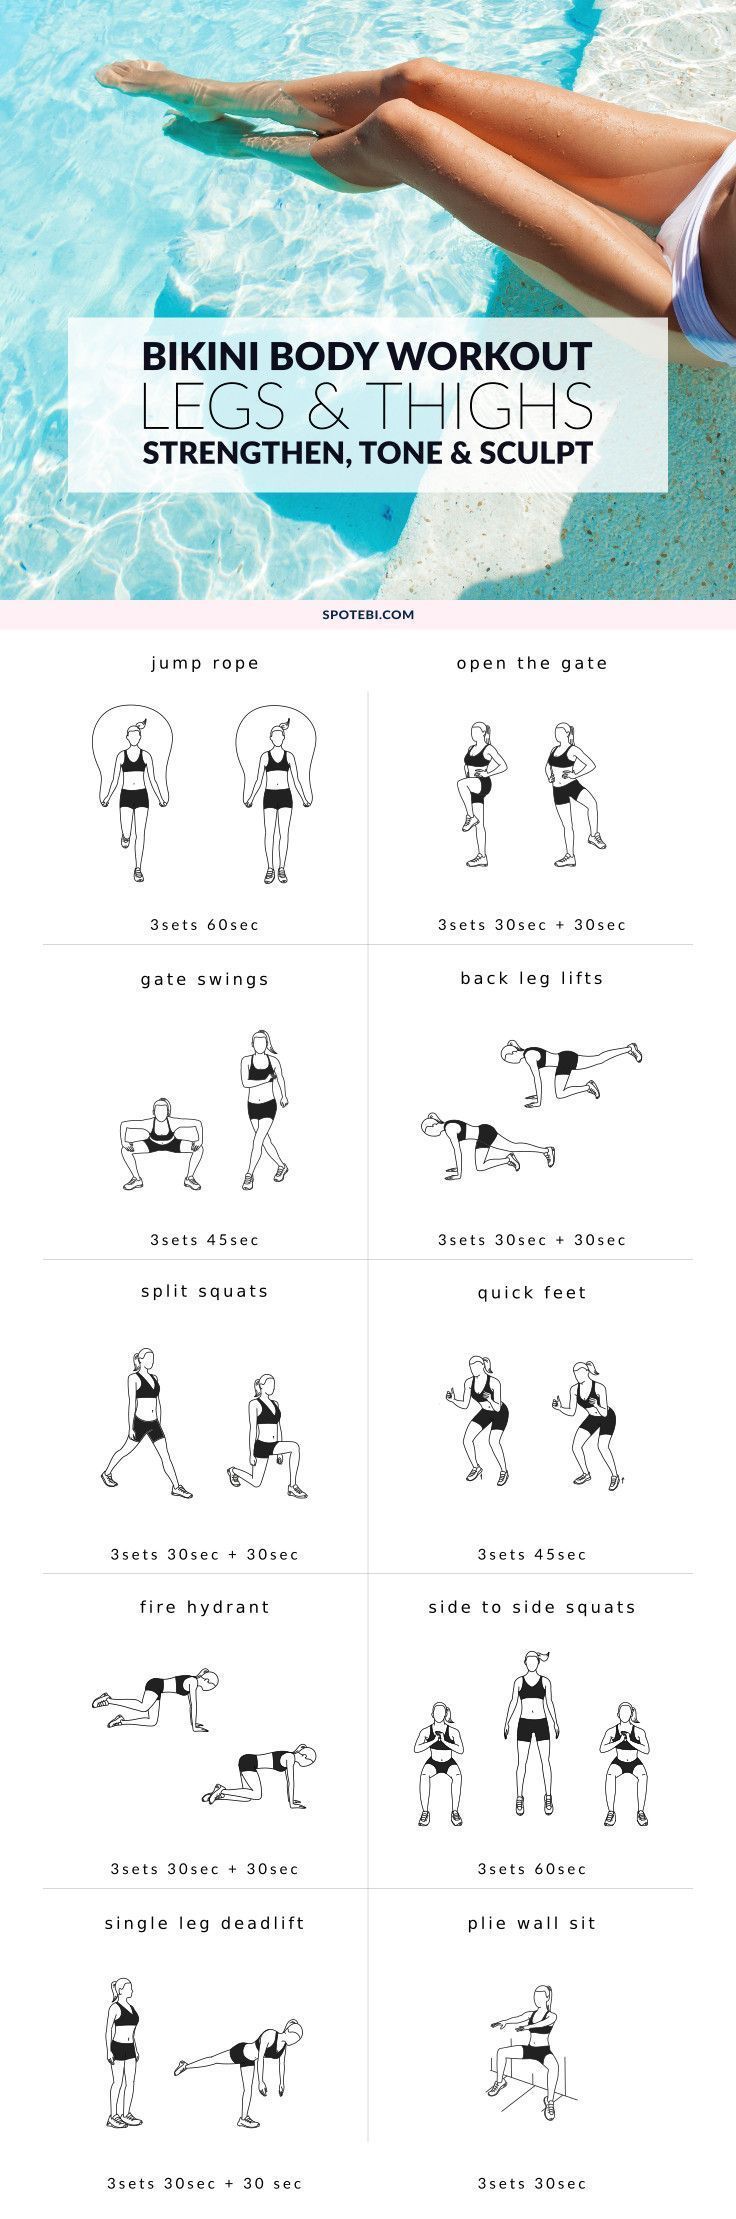 Work your hips, quads, hamstrings and calves with these 10 leg and thigh exercises for women. This lower body workout is designed